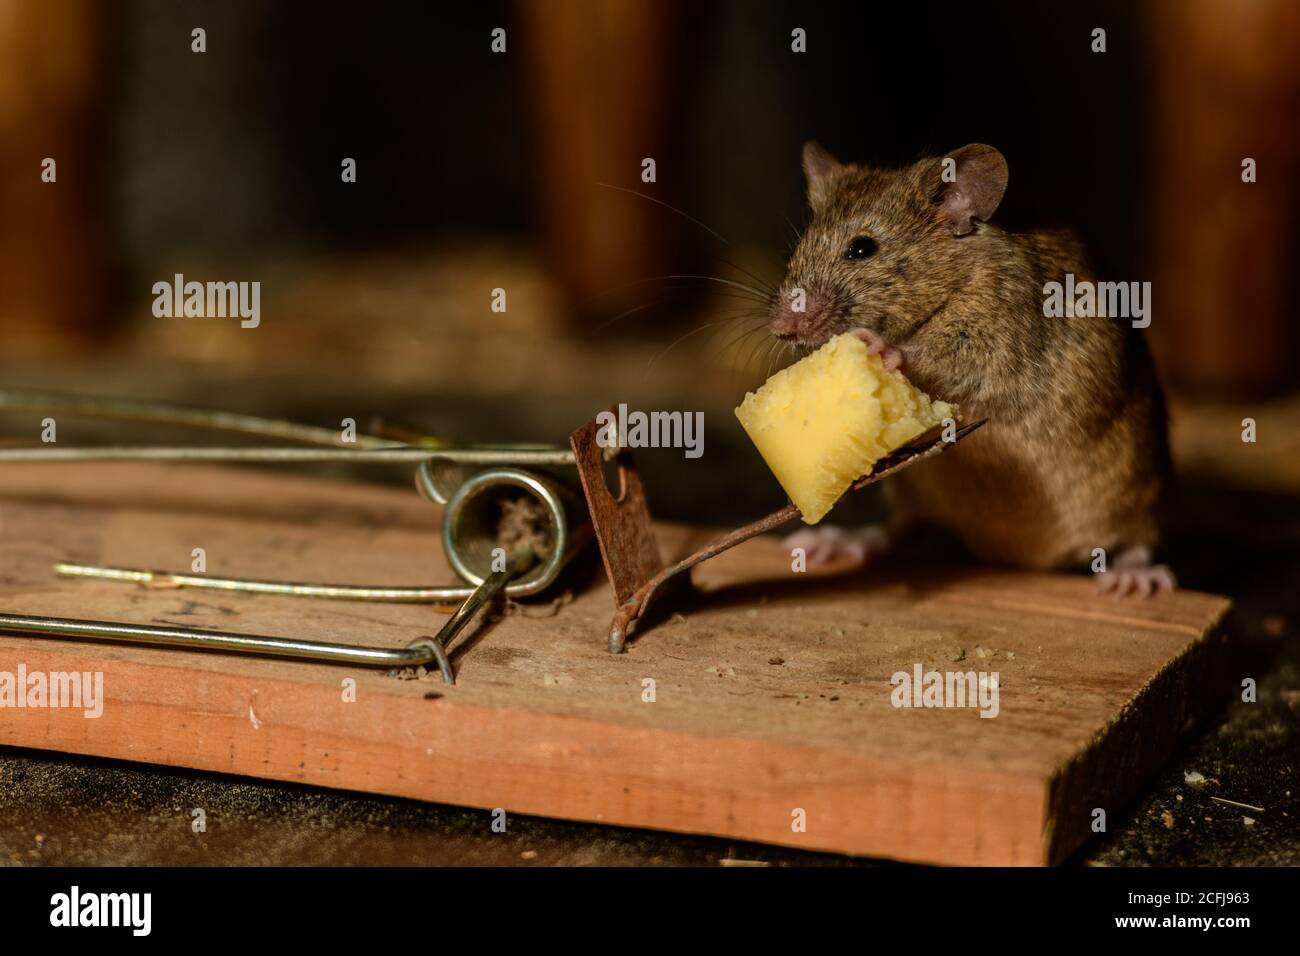 https://c8.alamy.com/comp/2CFJ963/autumn-or-fall-and-the-mice-come-in-from-the-coldand-the-trap-is-set-2CFJ963.jpg